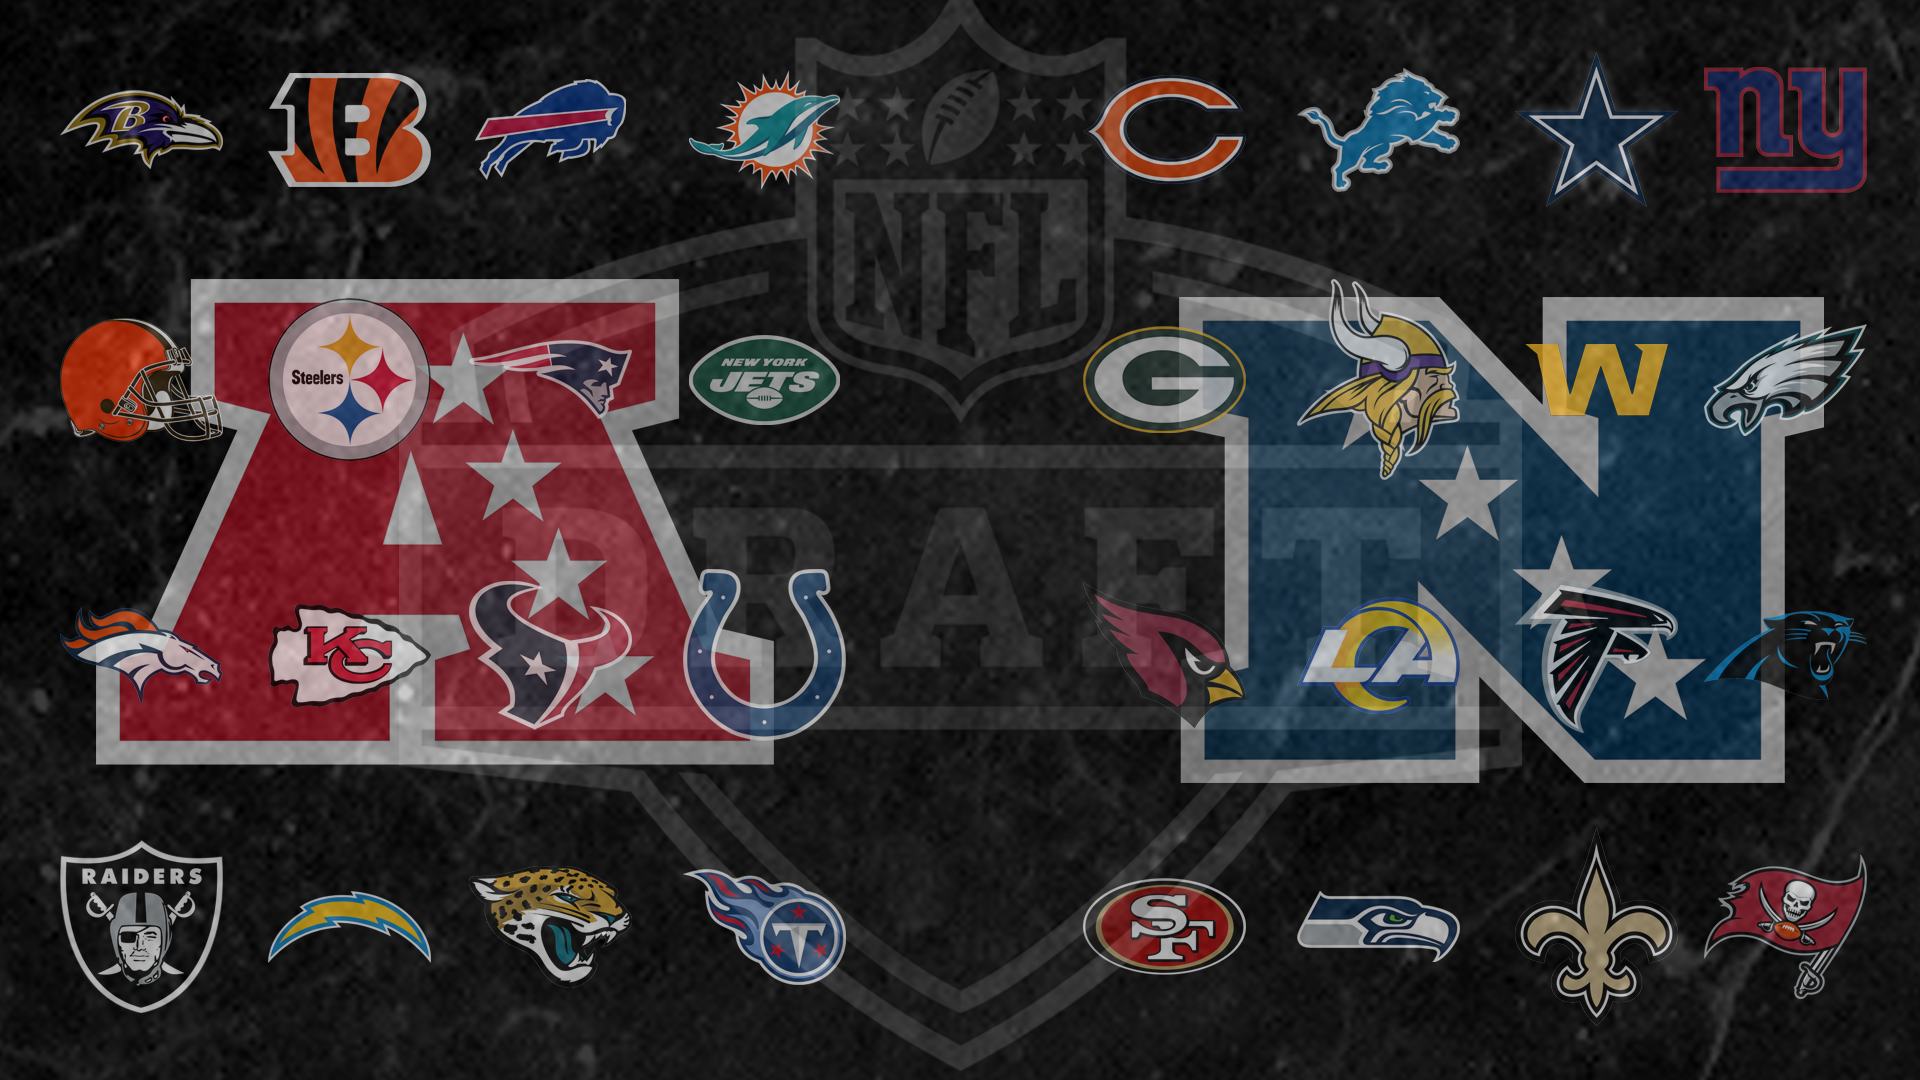 NFL Draft image with all 32 teams and both conference logos